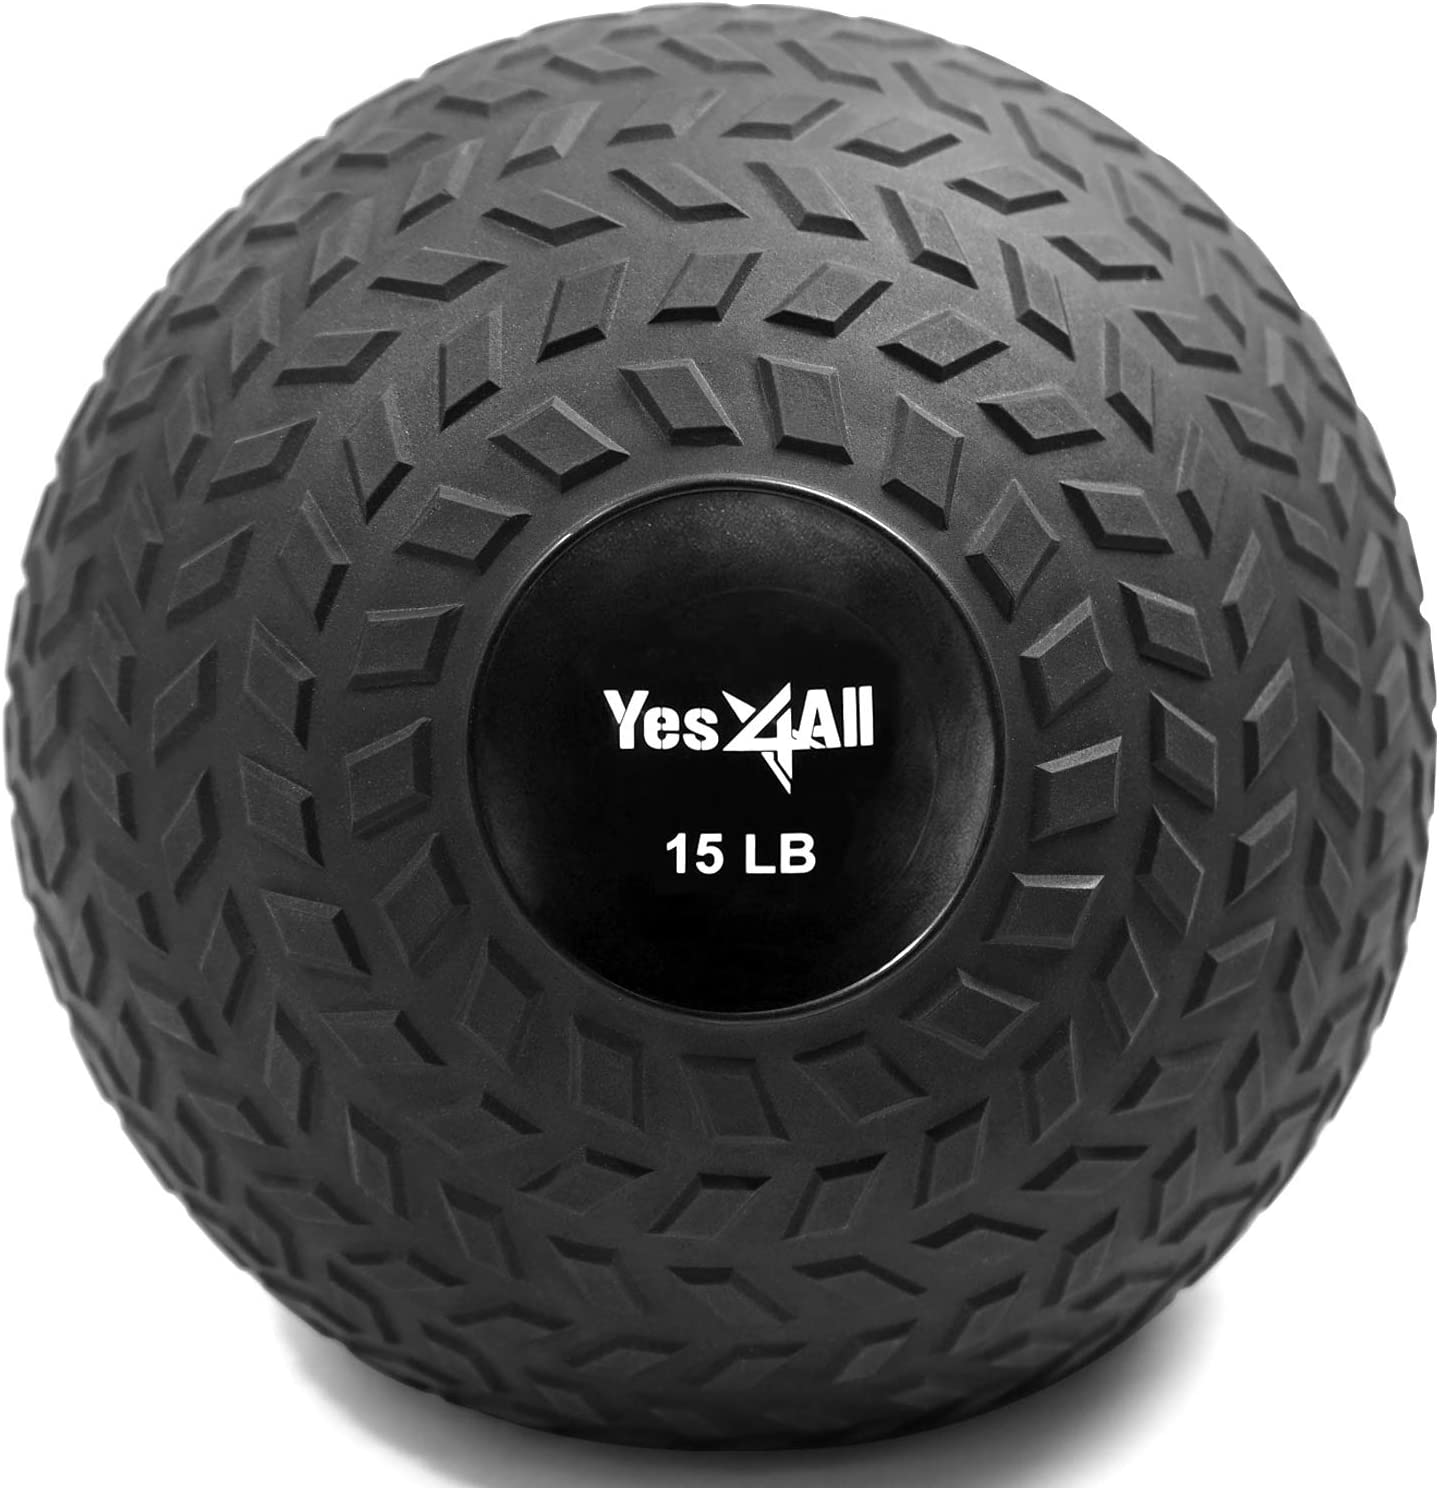 15-Lb Yes4All Slam Medicine Ball (Black) $15.50 + Free Shipping w/ Amazon Prime or FS on $25+